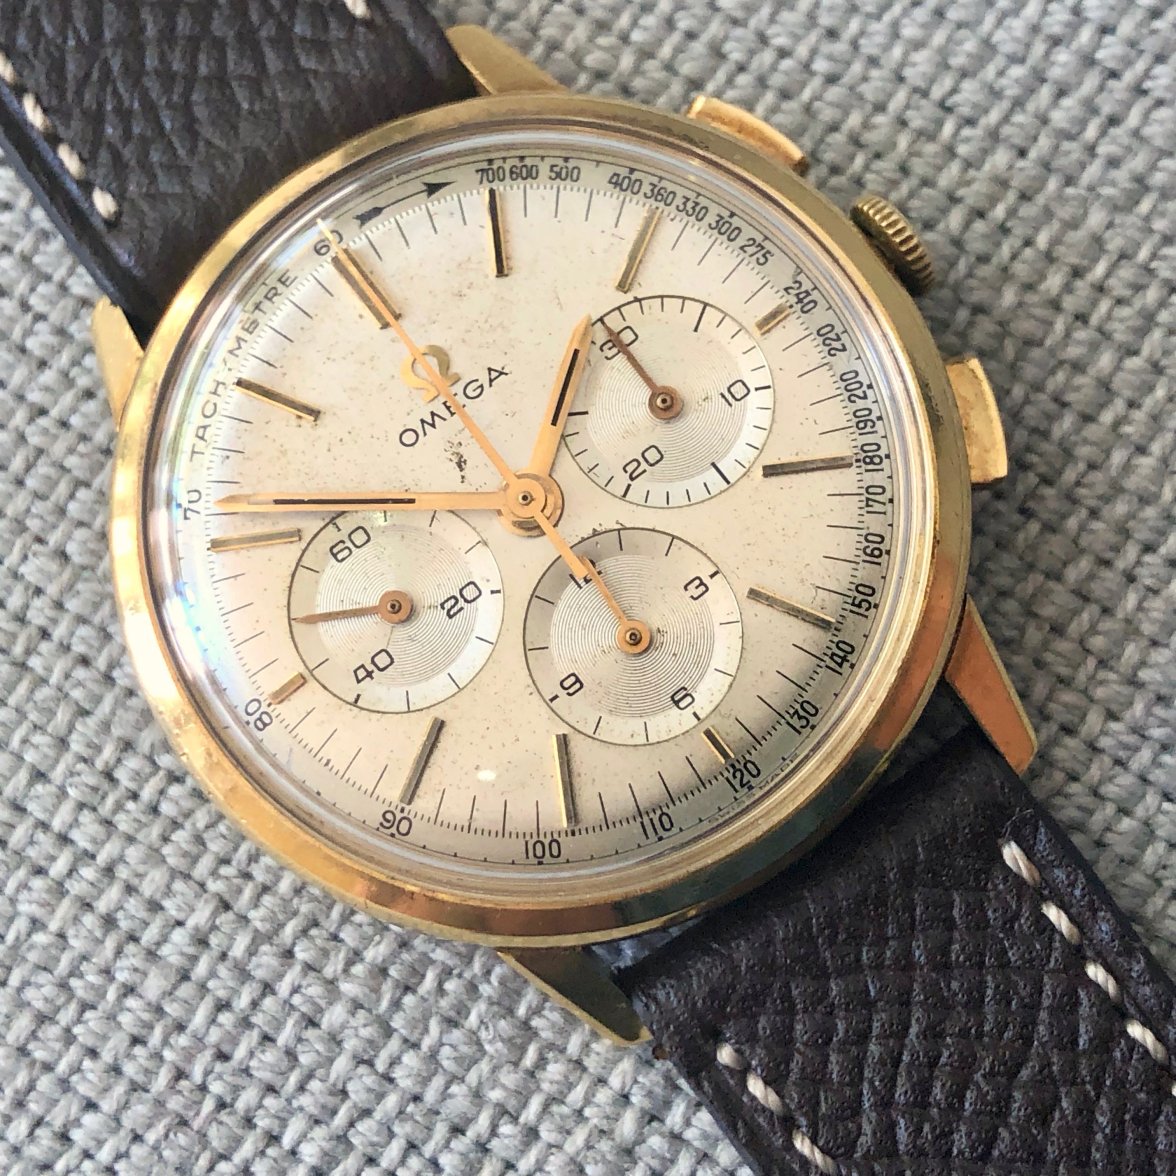 Cal. 321 Chrono in solid 18K YG - does this check out? | Omega Forums